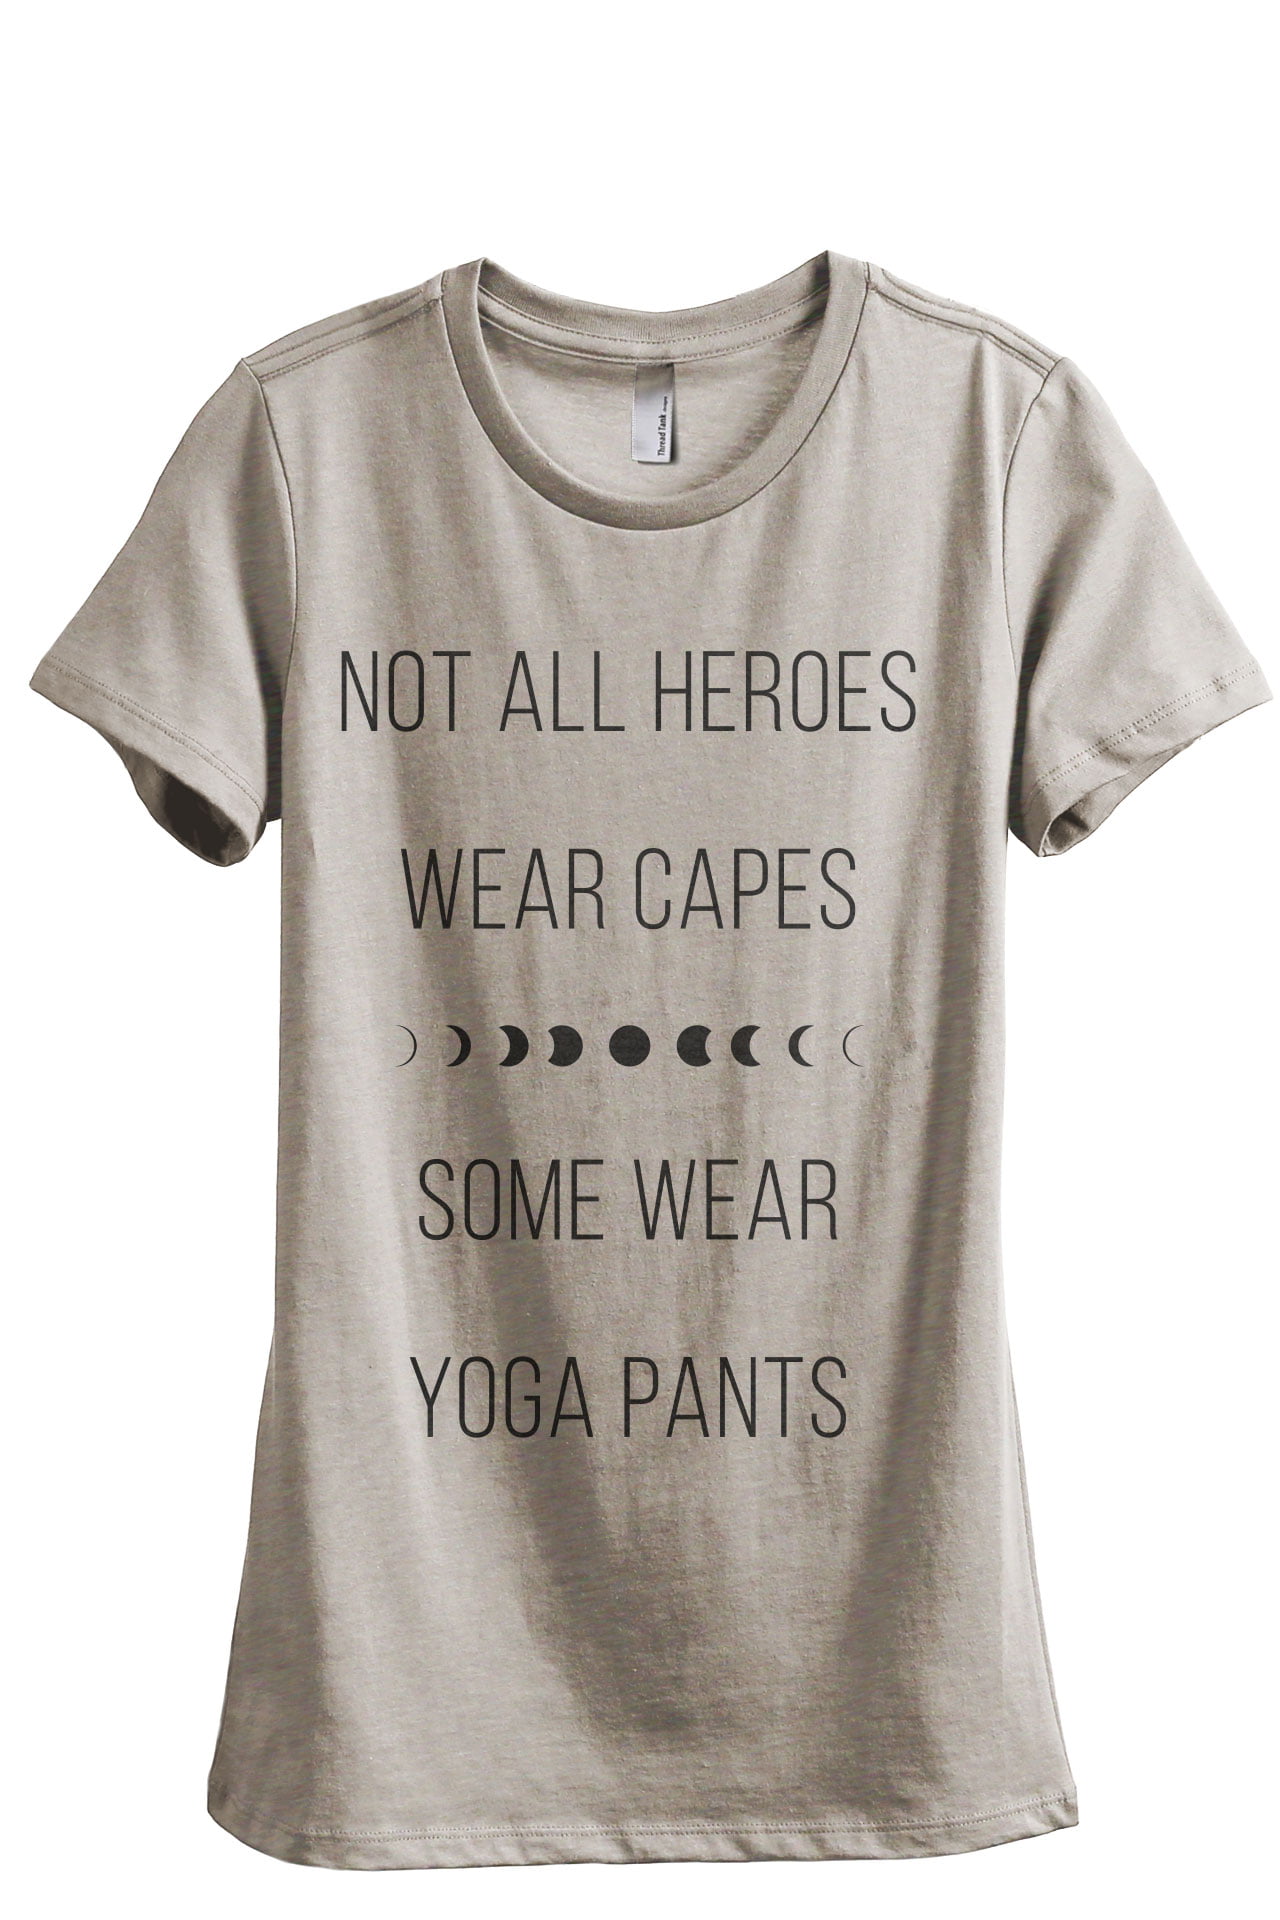 Not All Heroes Wear Capes Some Wear Yoga Pants Women's Fashion Relaxed  T-Shirt Tee Heather Tan 2X-Large